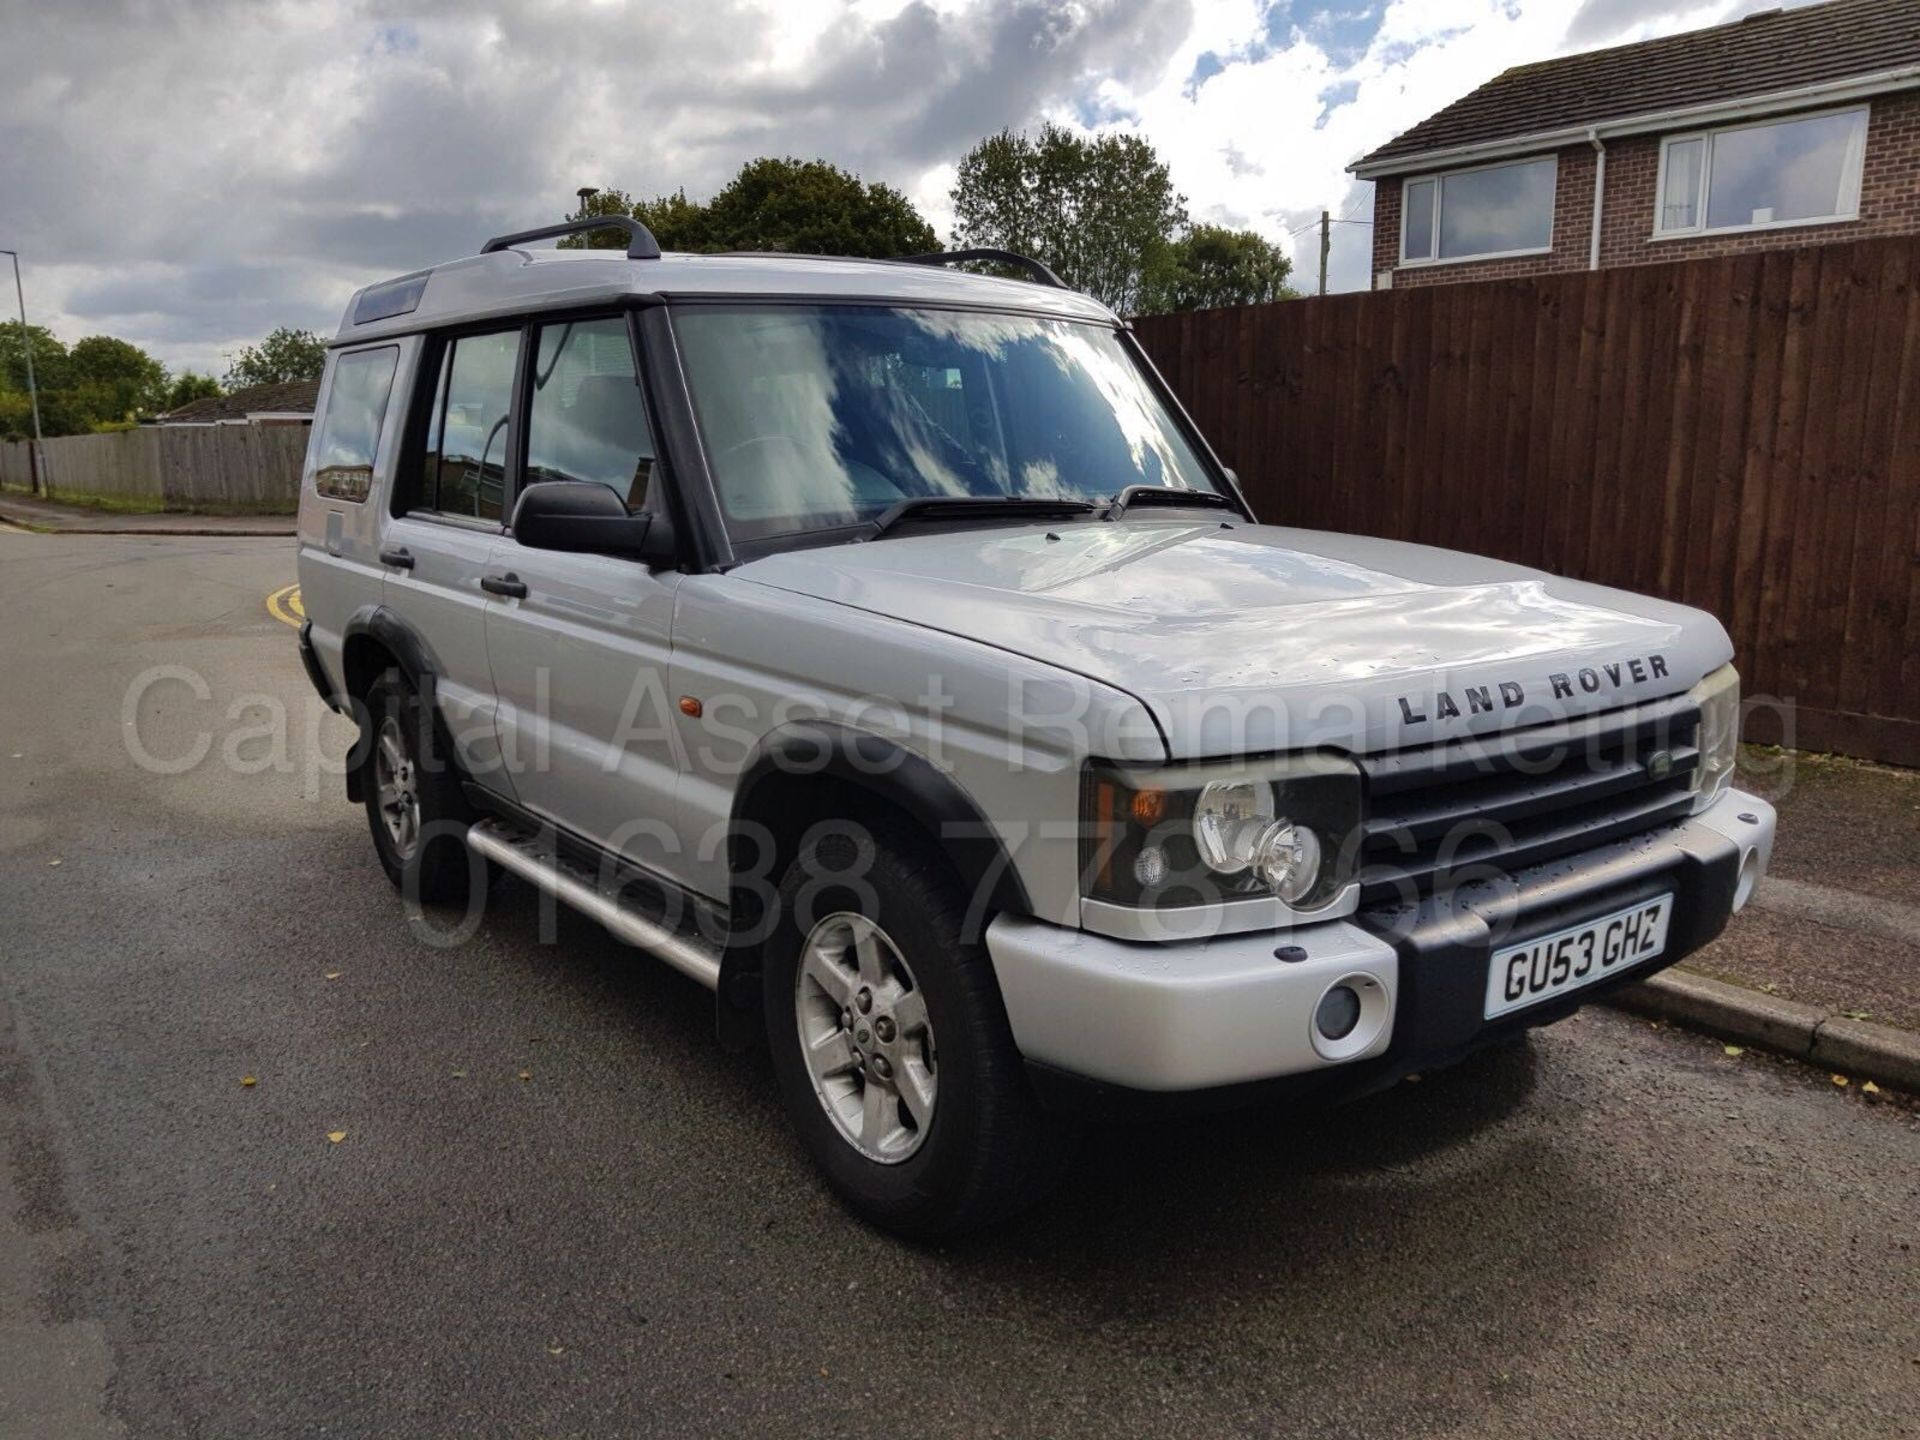 (On Sale) LAND ROVER DISCOVERY 'GS EDITION' (2004 MODEL) 'TD5 - AUTO - 7 SEATER' (NO VAT - SAVE 20%)